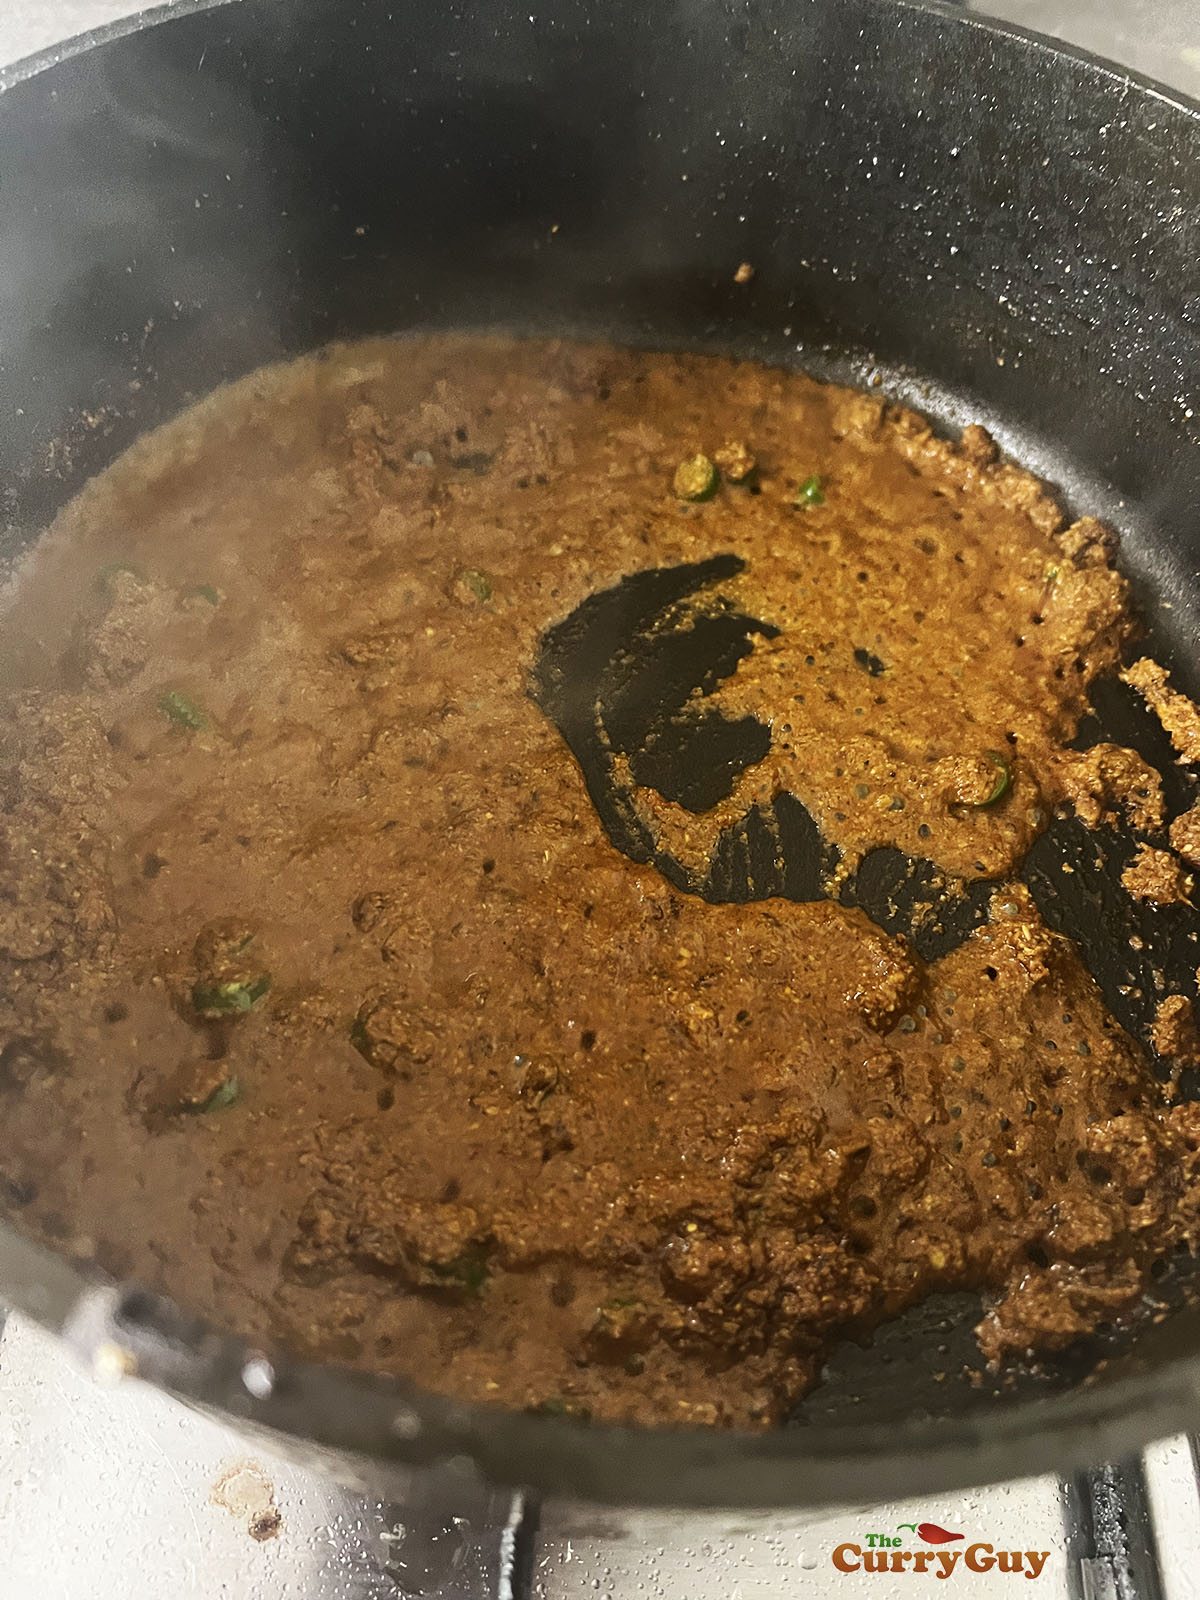 Adding ground spices and water to the pan.